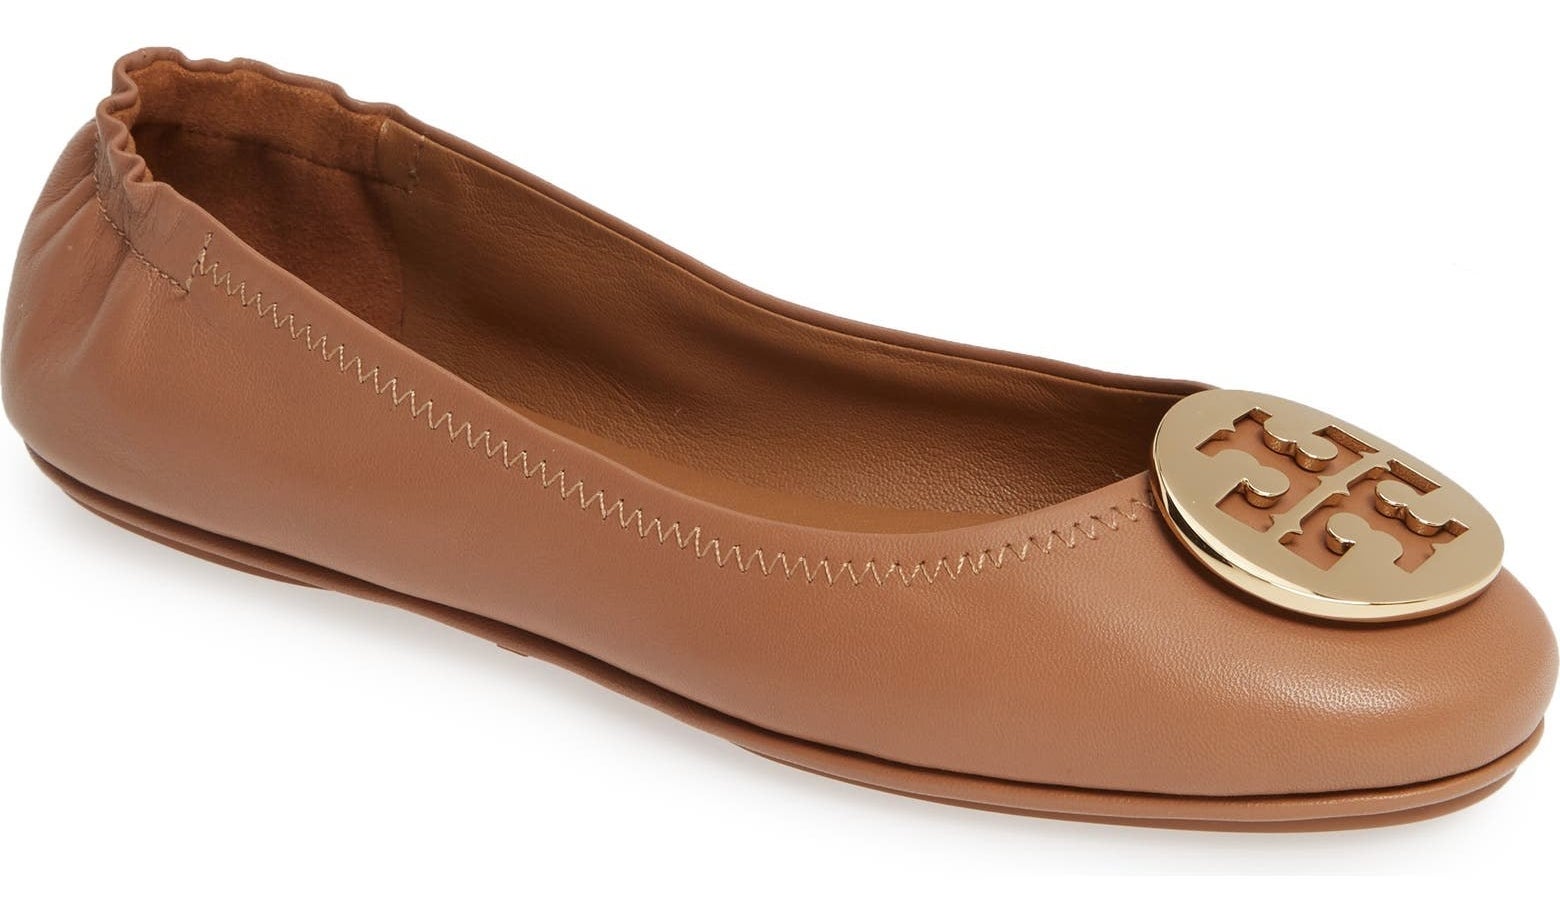 The tan ballet flat with Tory Burch&#x27;s signature medallion in gold